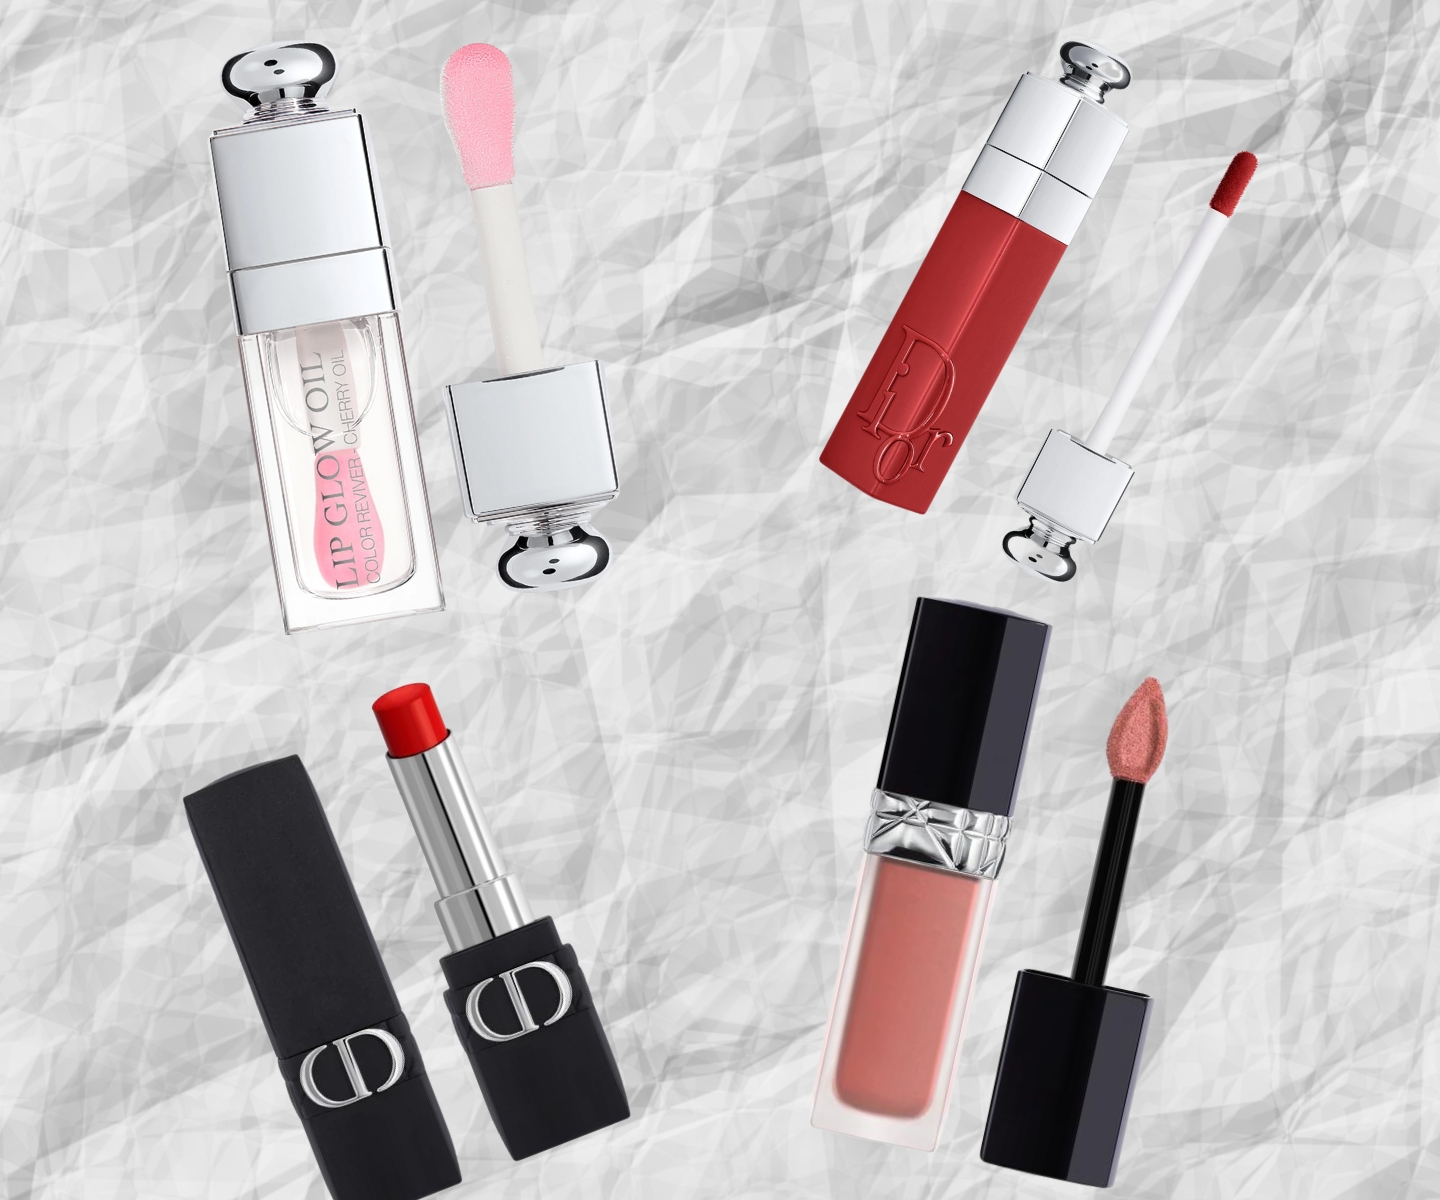 Preview- Dior Lunar New Year Beauty Collection 2023 (Lipstick Sets,  Discovery Perfume Set, & More) 